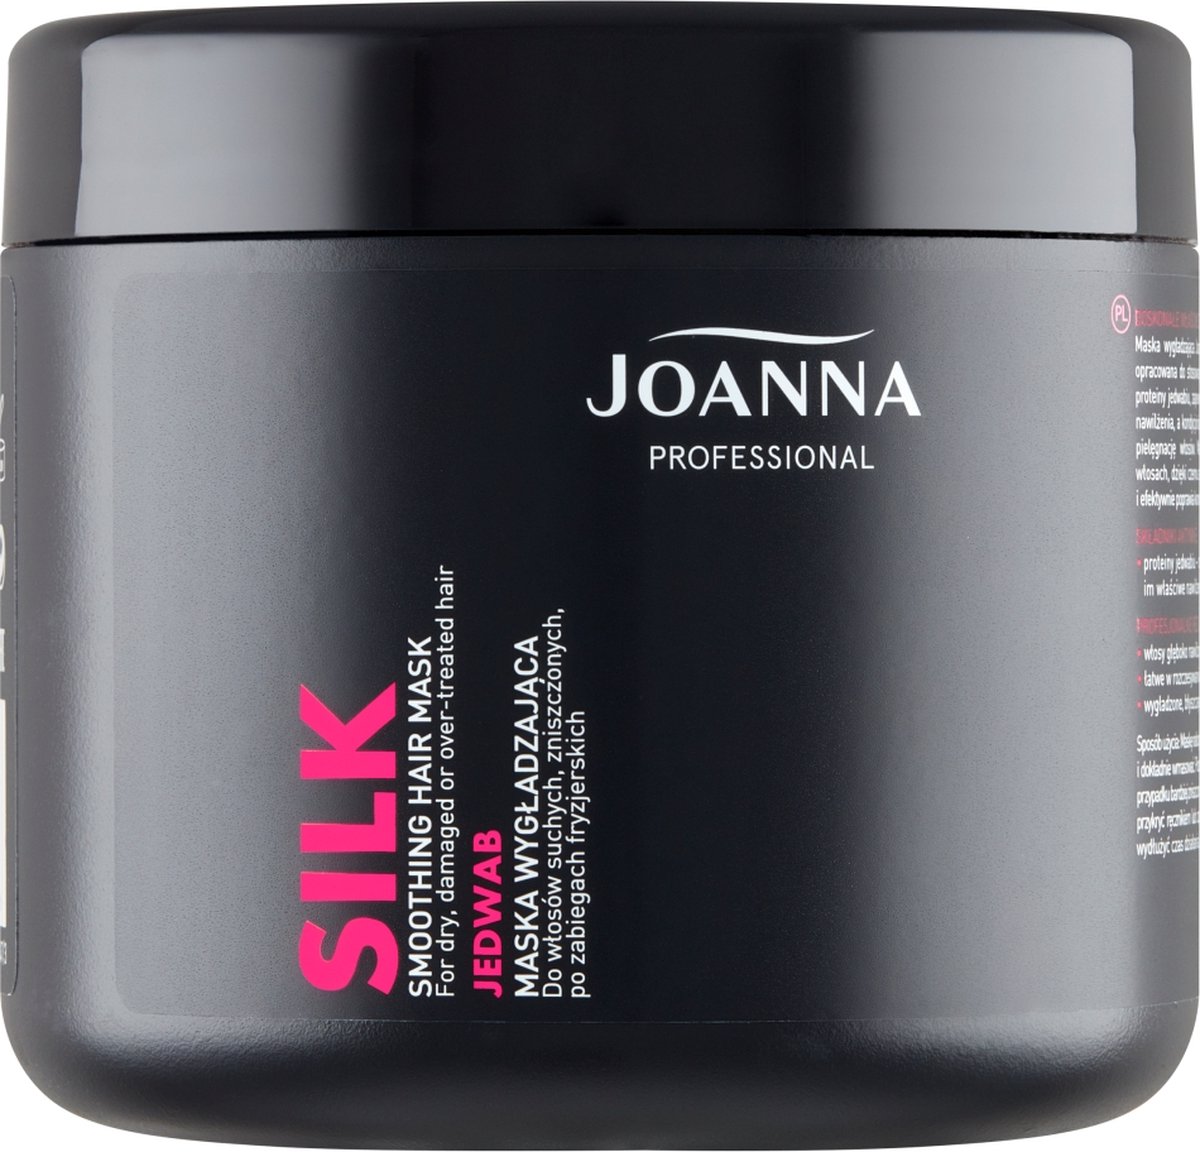 Joanna Professional - Silk Smoothing Hair Smoothing Mask For Dry And Damaged Hair From Silk 500G